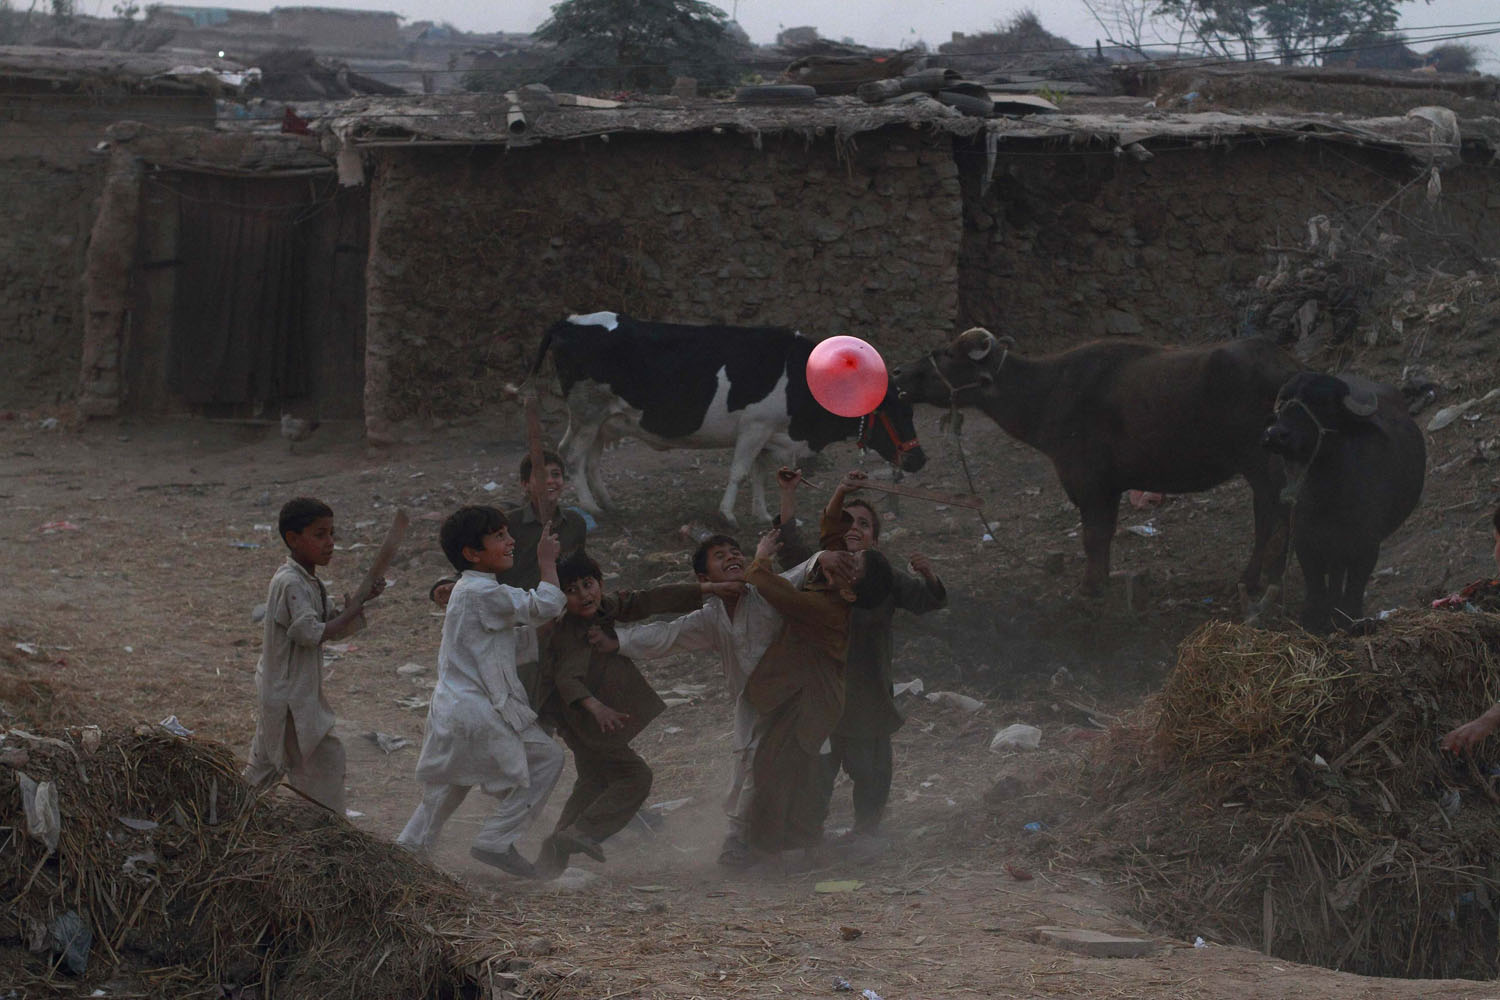 Image: Nov. 2, 2012. Boys play with a balloon at a slum on the outskirts of Islamabad.